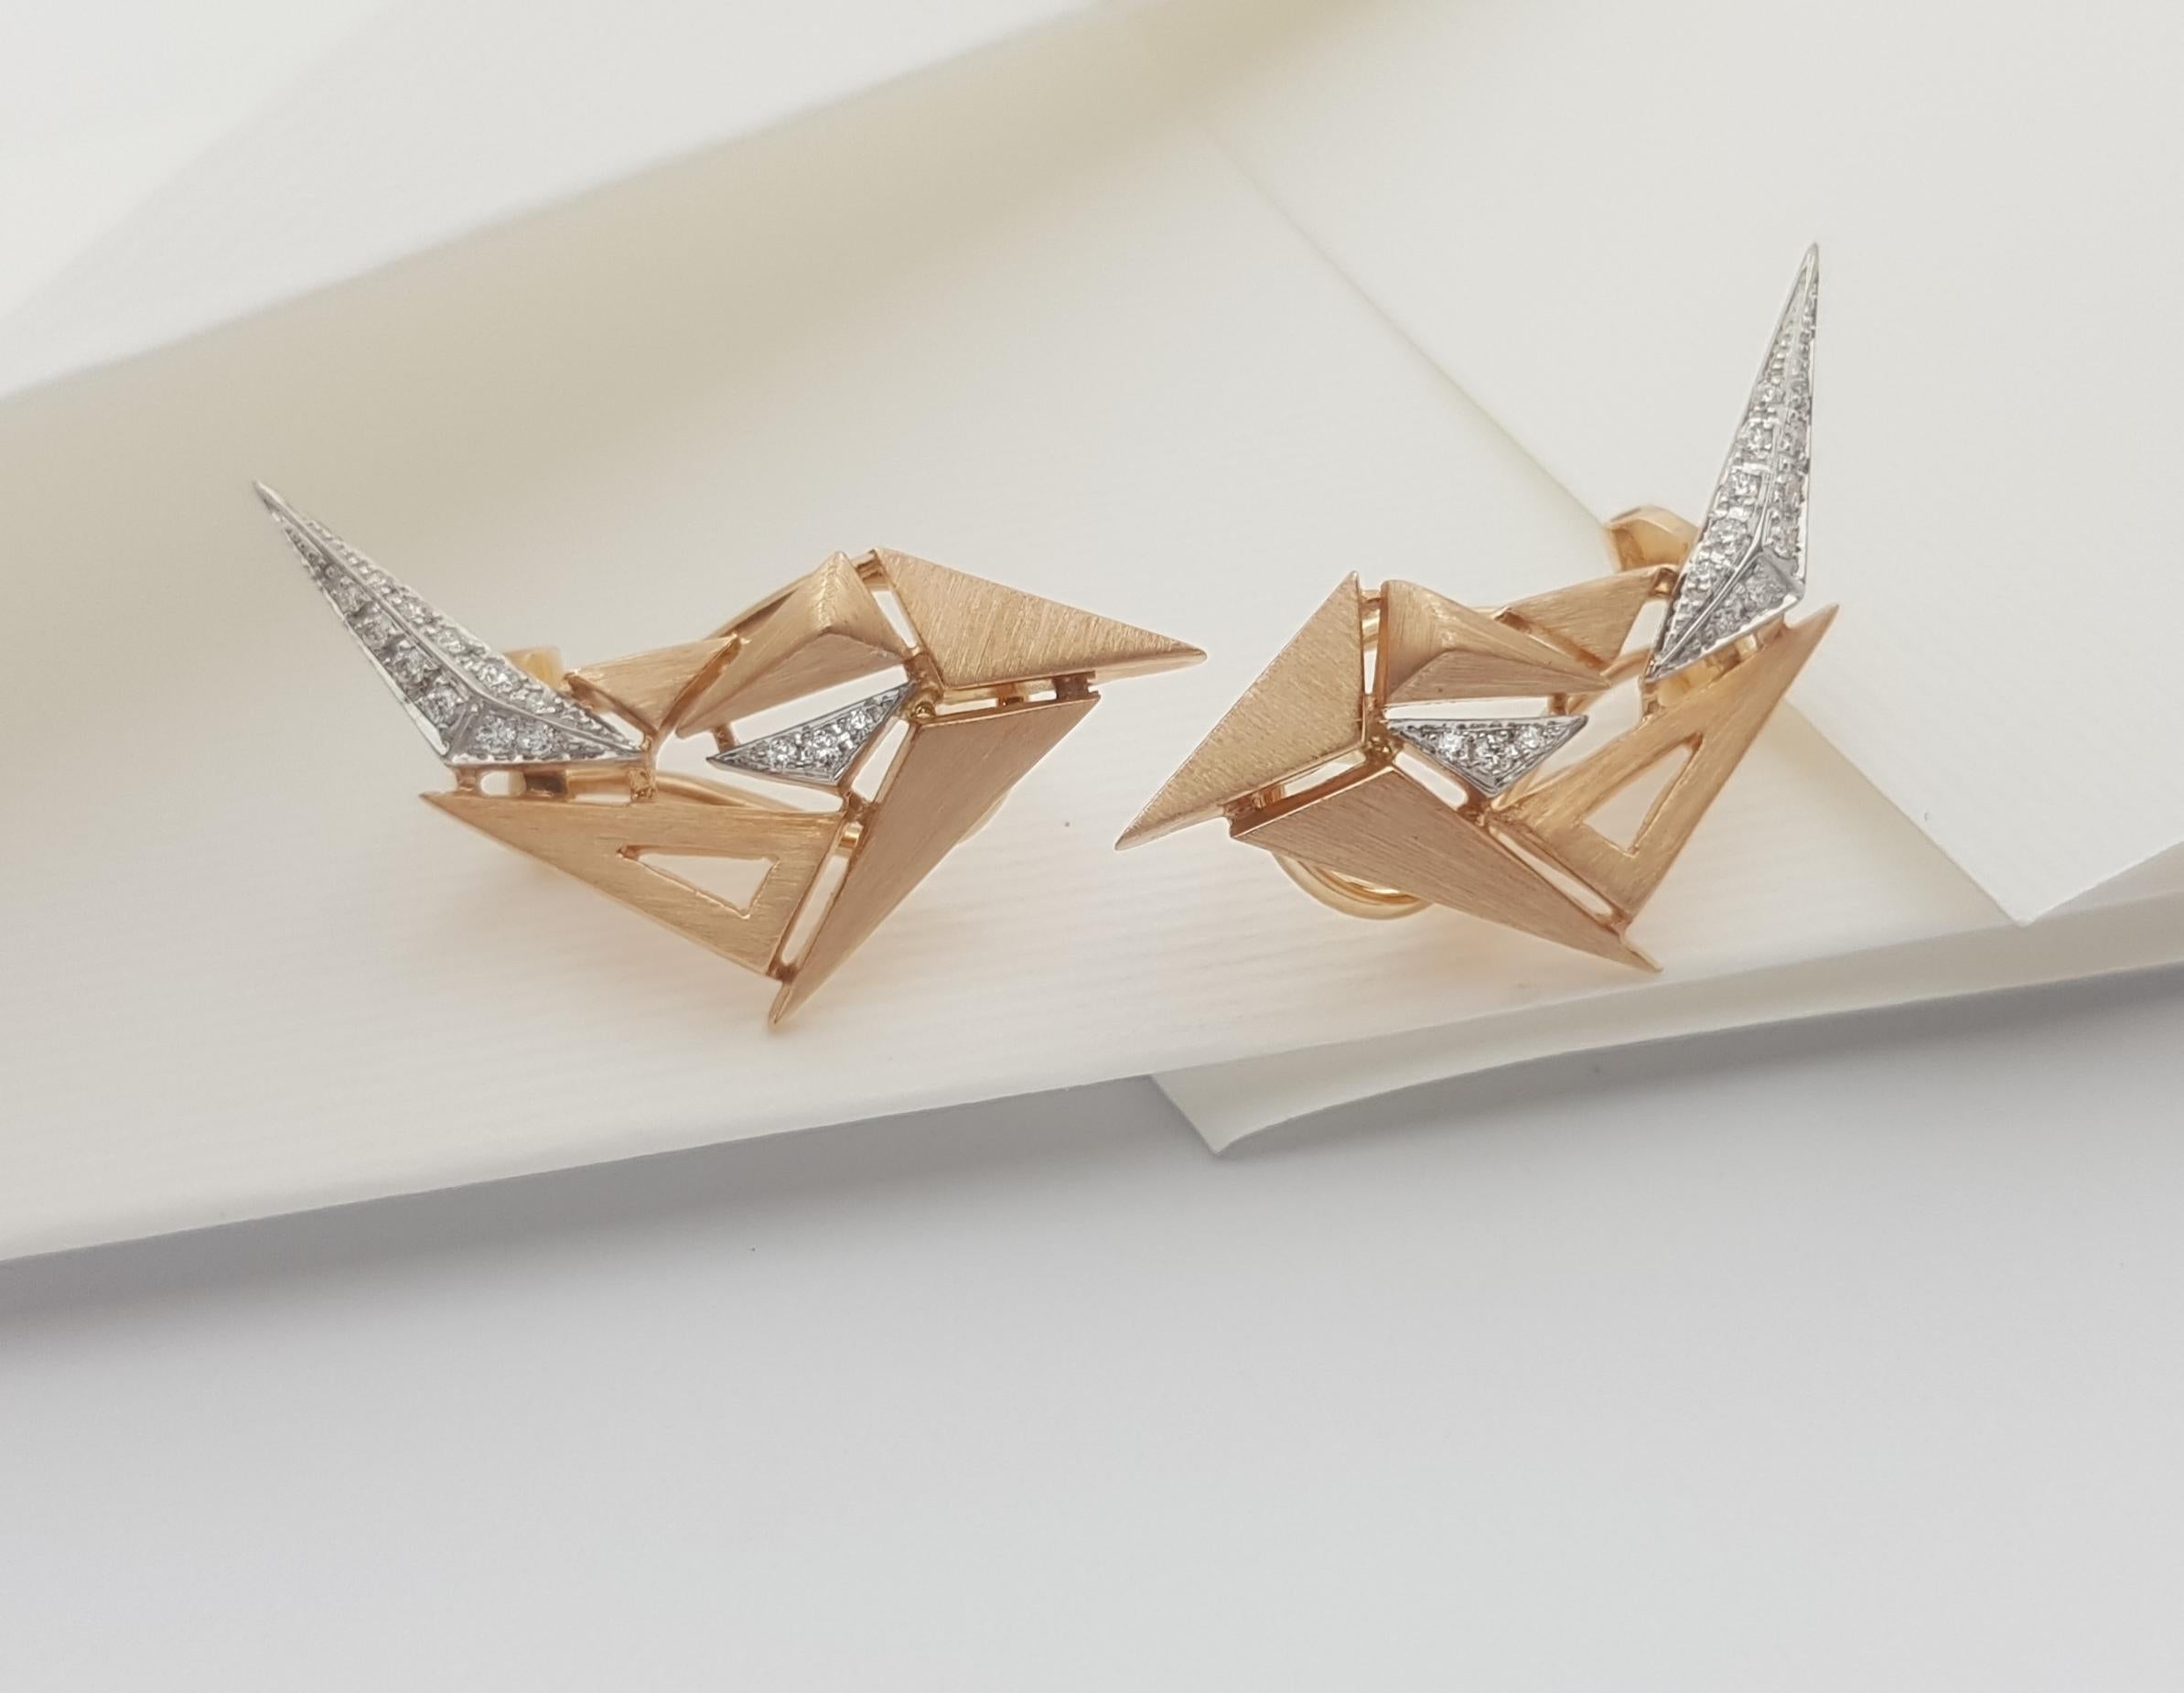 Diamond 0.57 carats Earrings 18K Rose Gold

Width: 1.3 cm
Length: 1.6 cm
Weight: 3.07 grams

The ancient Japanese tradition of paper folding has inspired the form and elements of this modern collection. With a series of folds and pleats, each piece